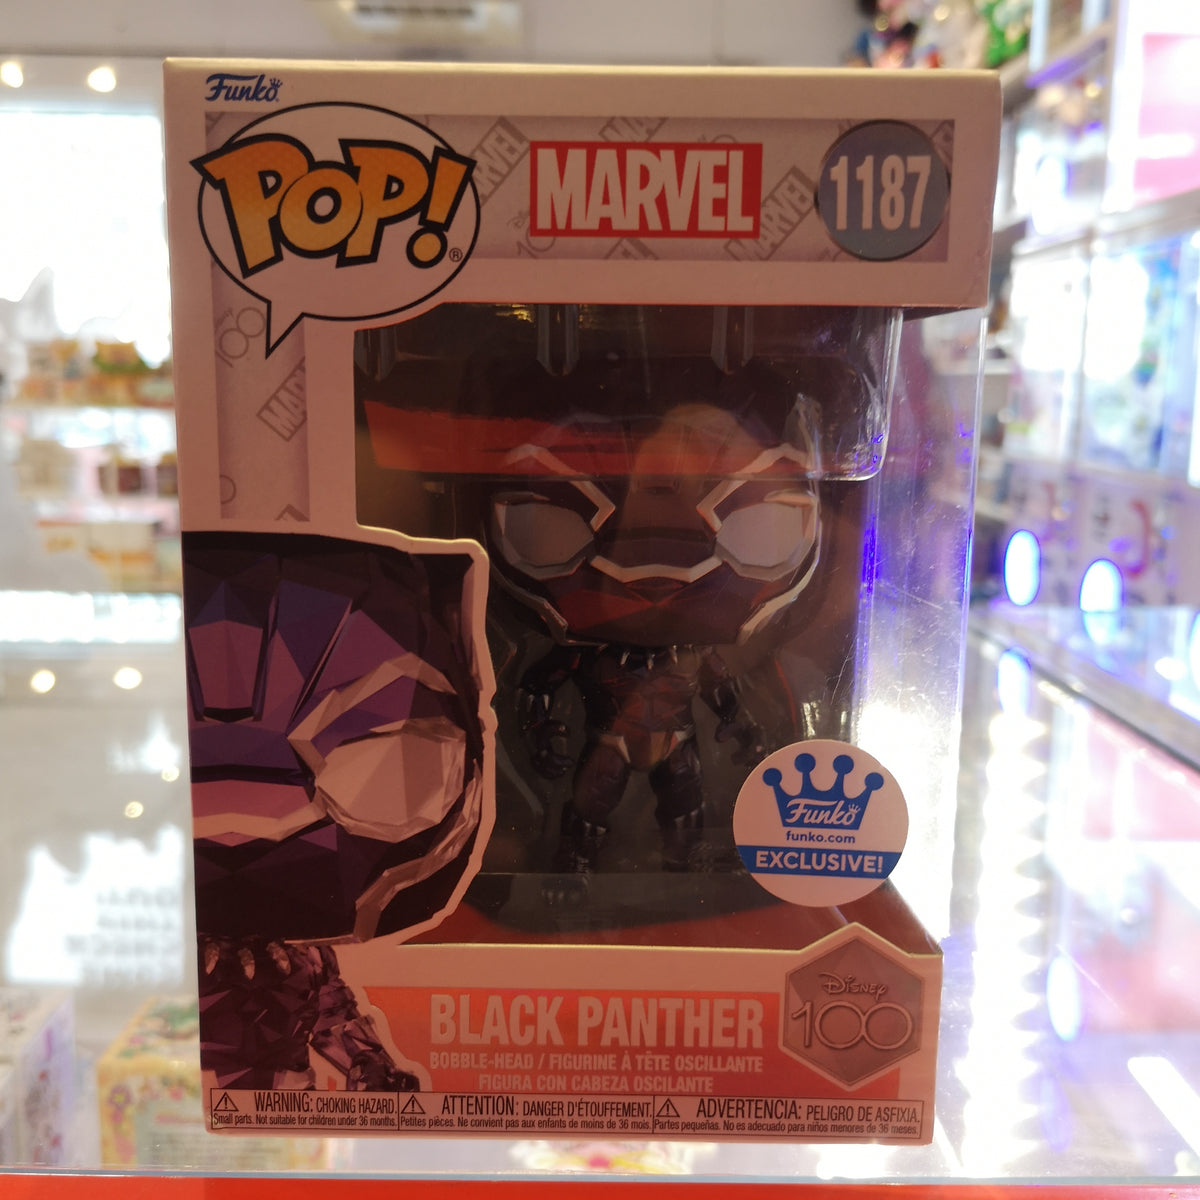 Black Panther - Marvel Funko POP! by Funko